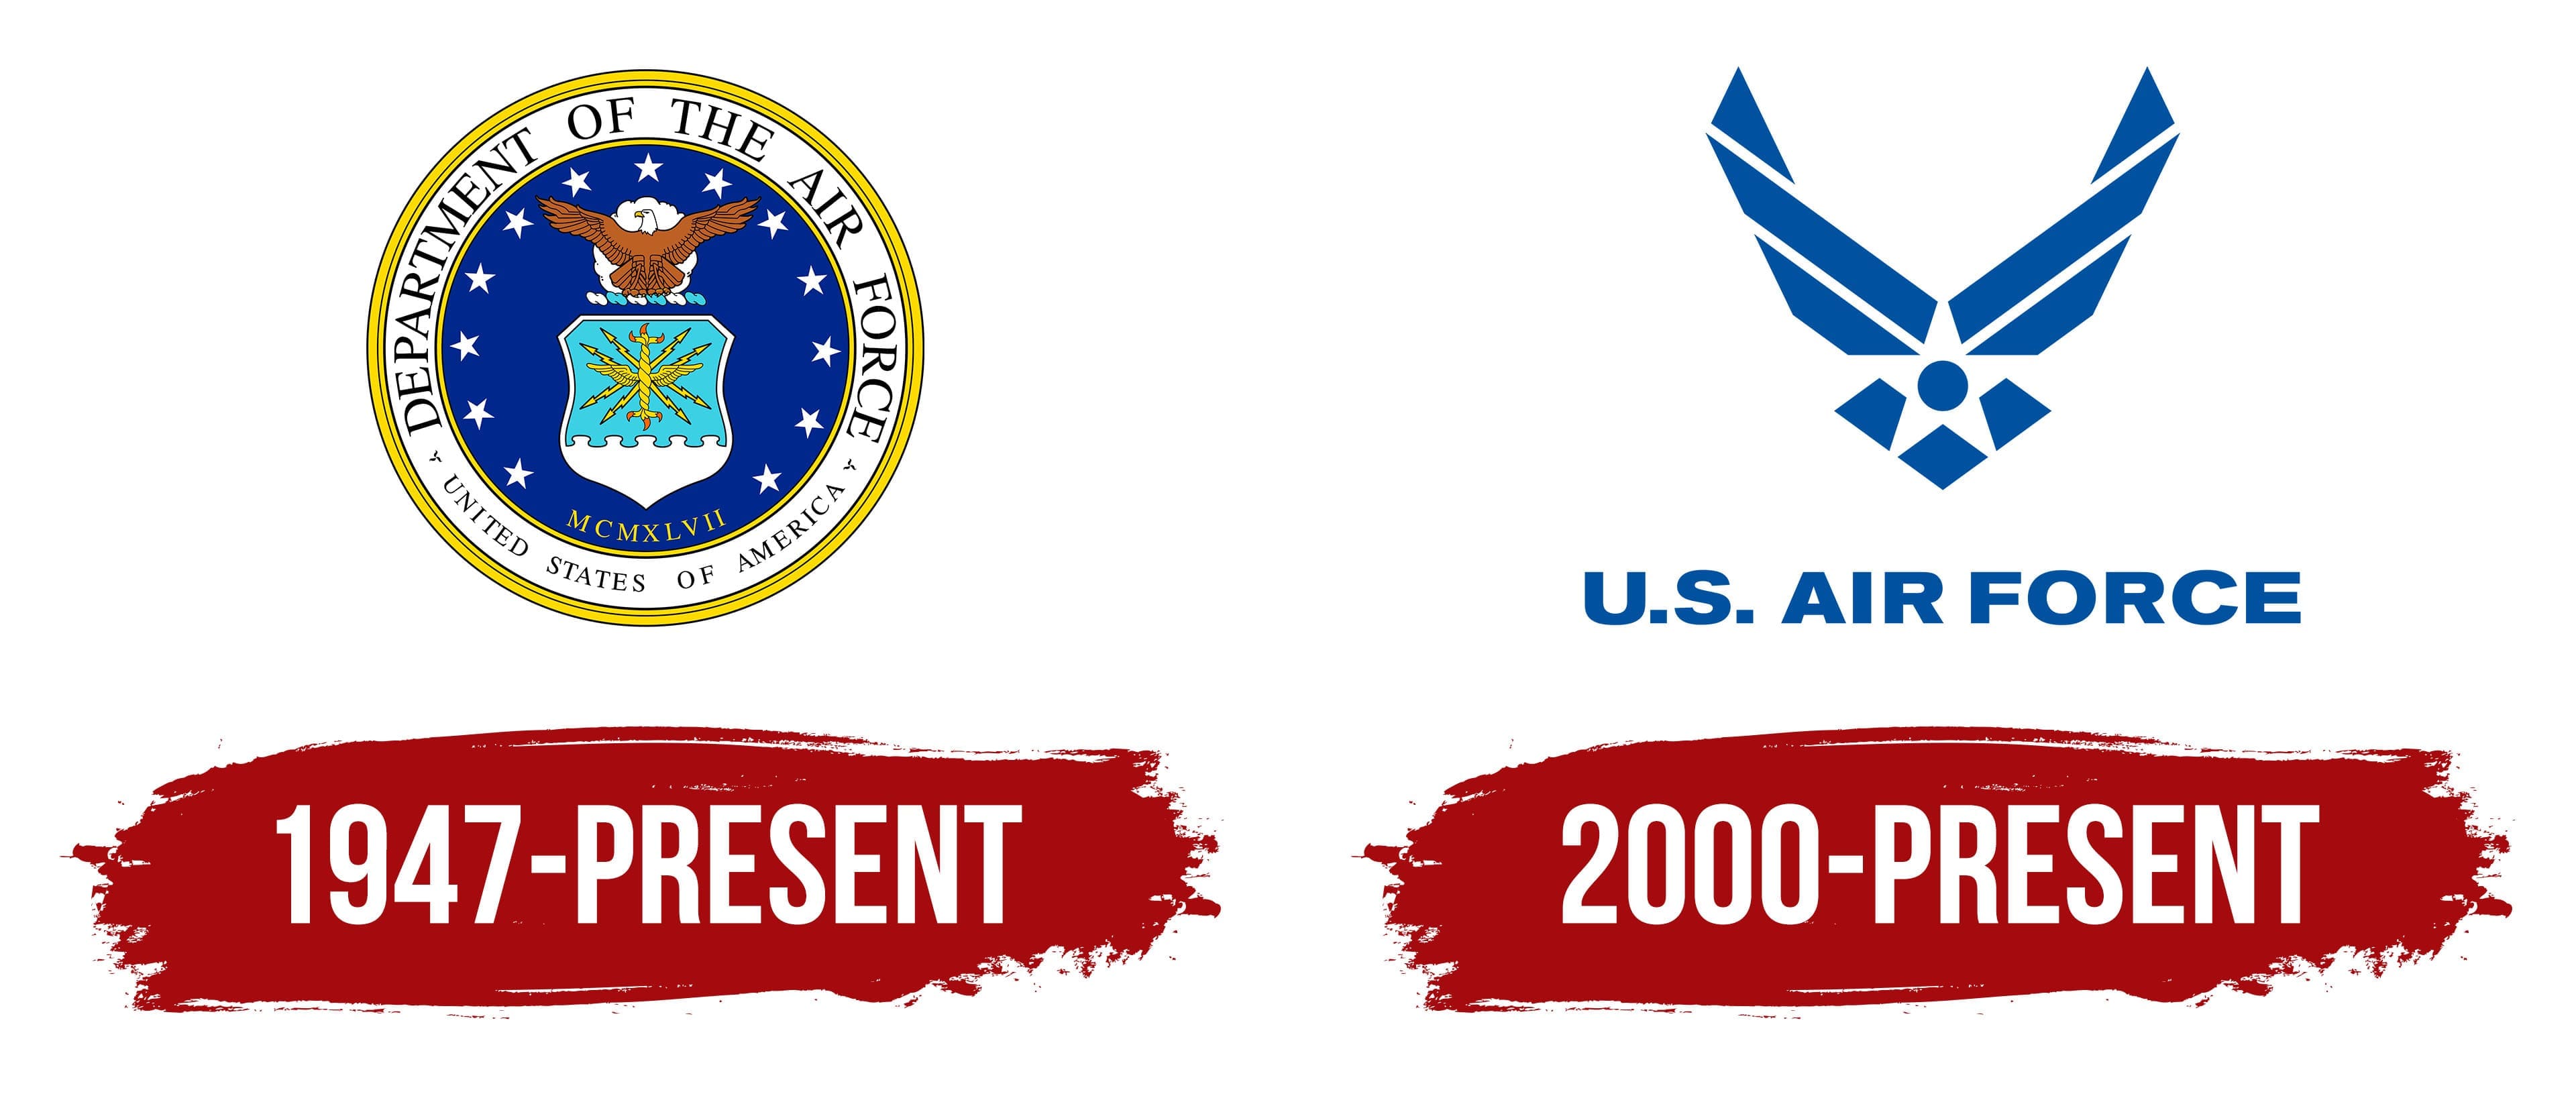 United States Air Force Logos - 194+ Best United States Air Force